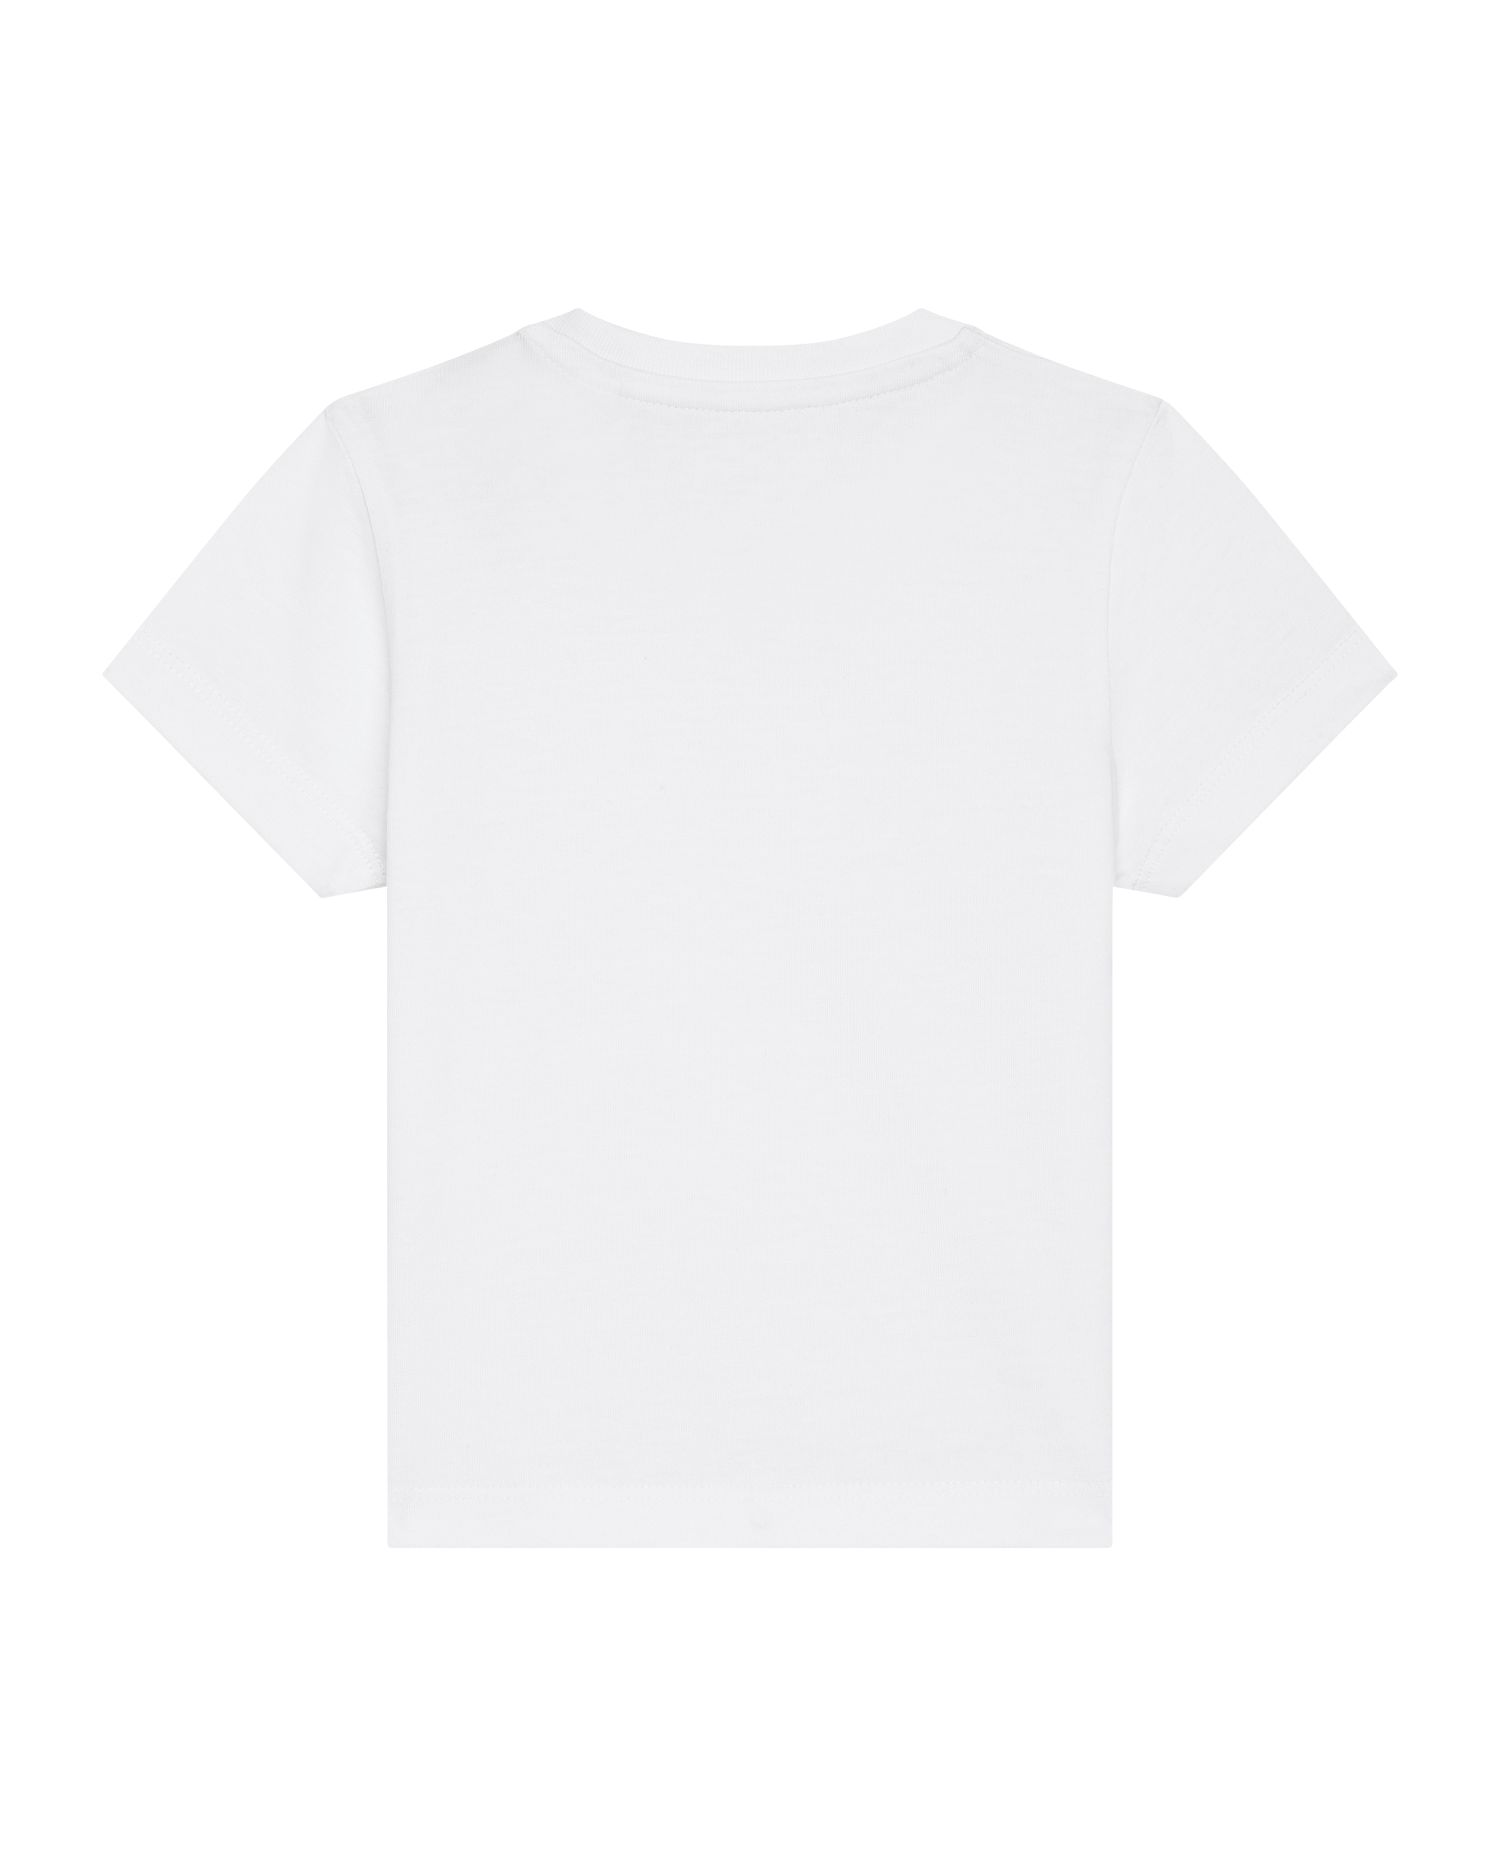 T-Shirt Baby Creator in Farbe White